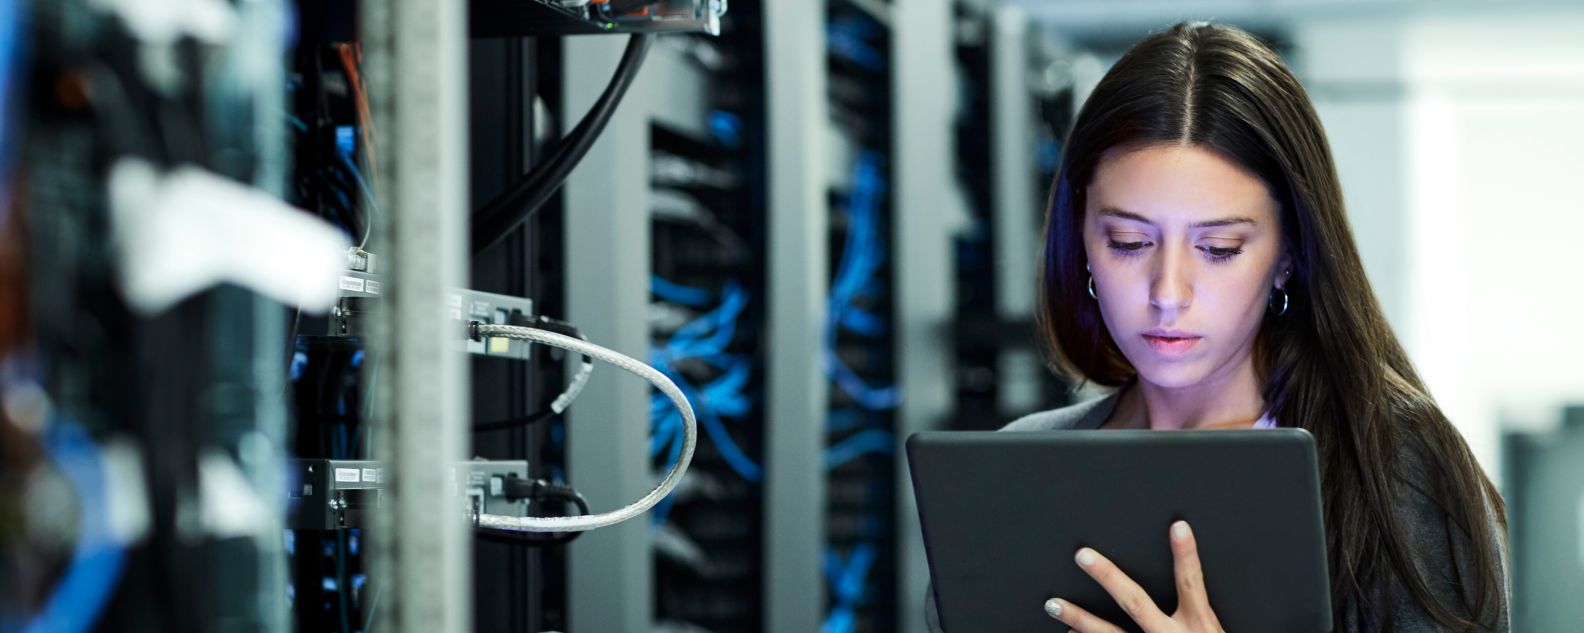 a woman looking at a tablet in a server room